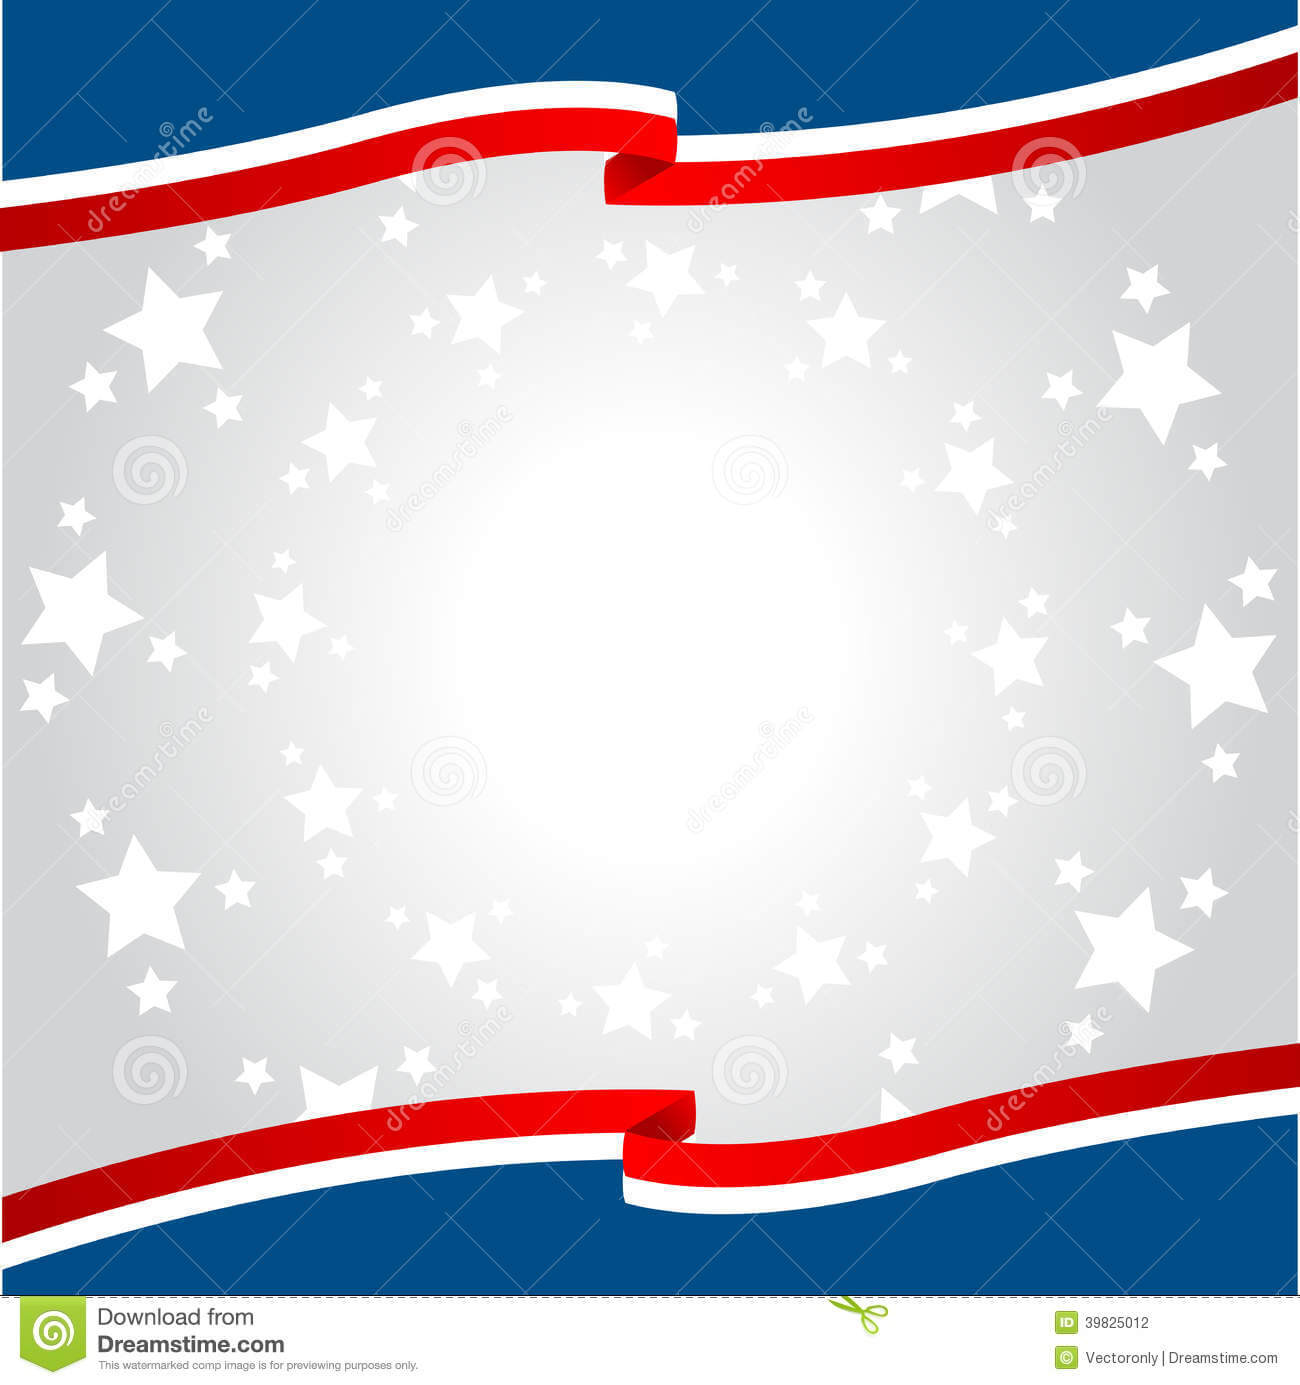 Patriotic Stock Vector Image 39825012 Quality Backgrounds Inside Patriotic Powerpoint Template